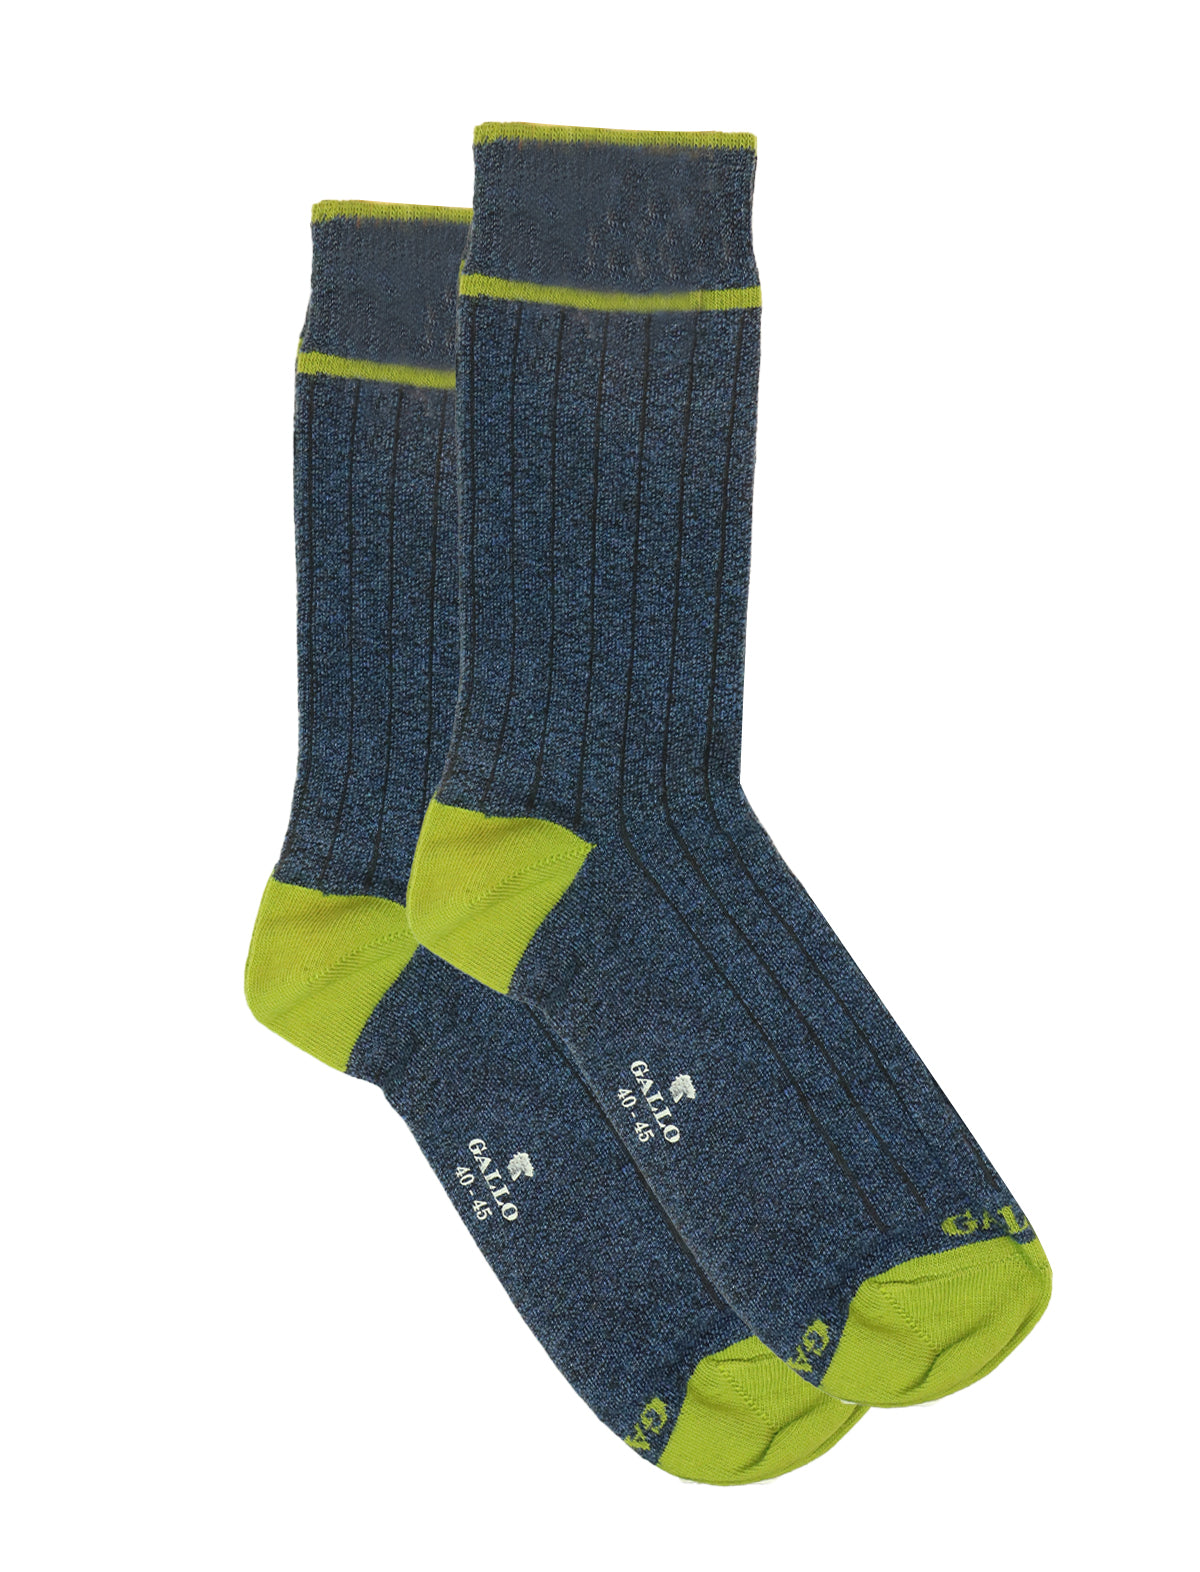 Gallo Socks in Blue Pinstripes w/ Lime Contrast